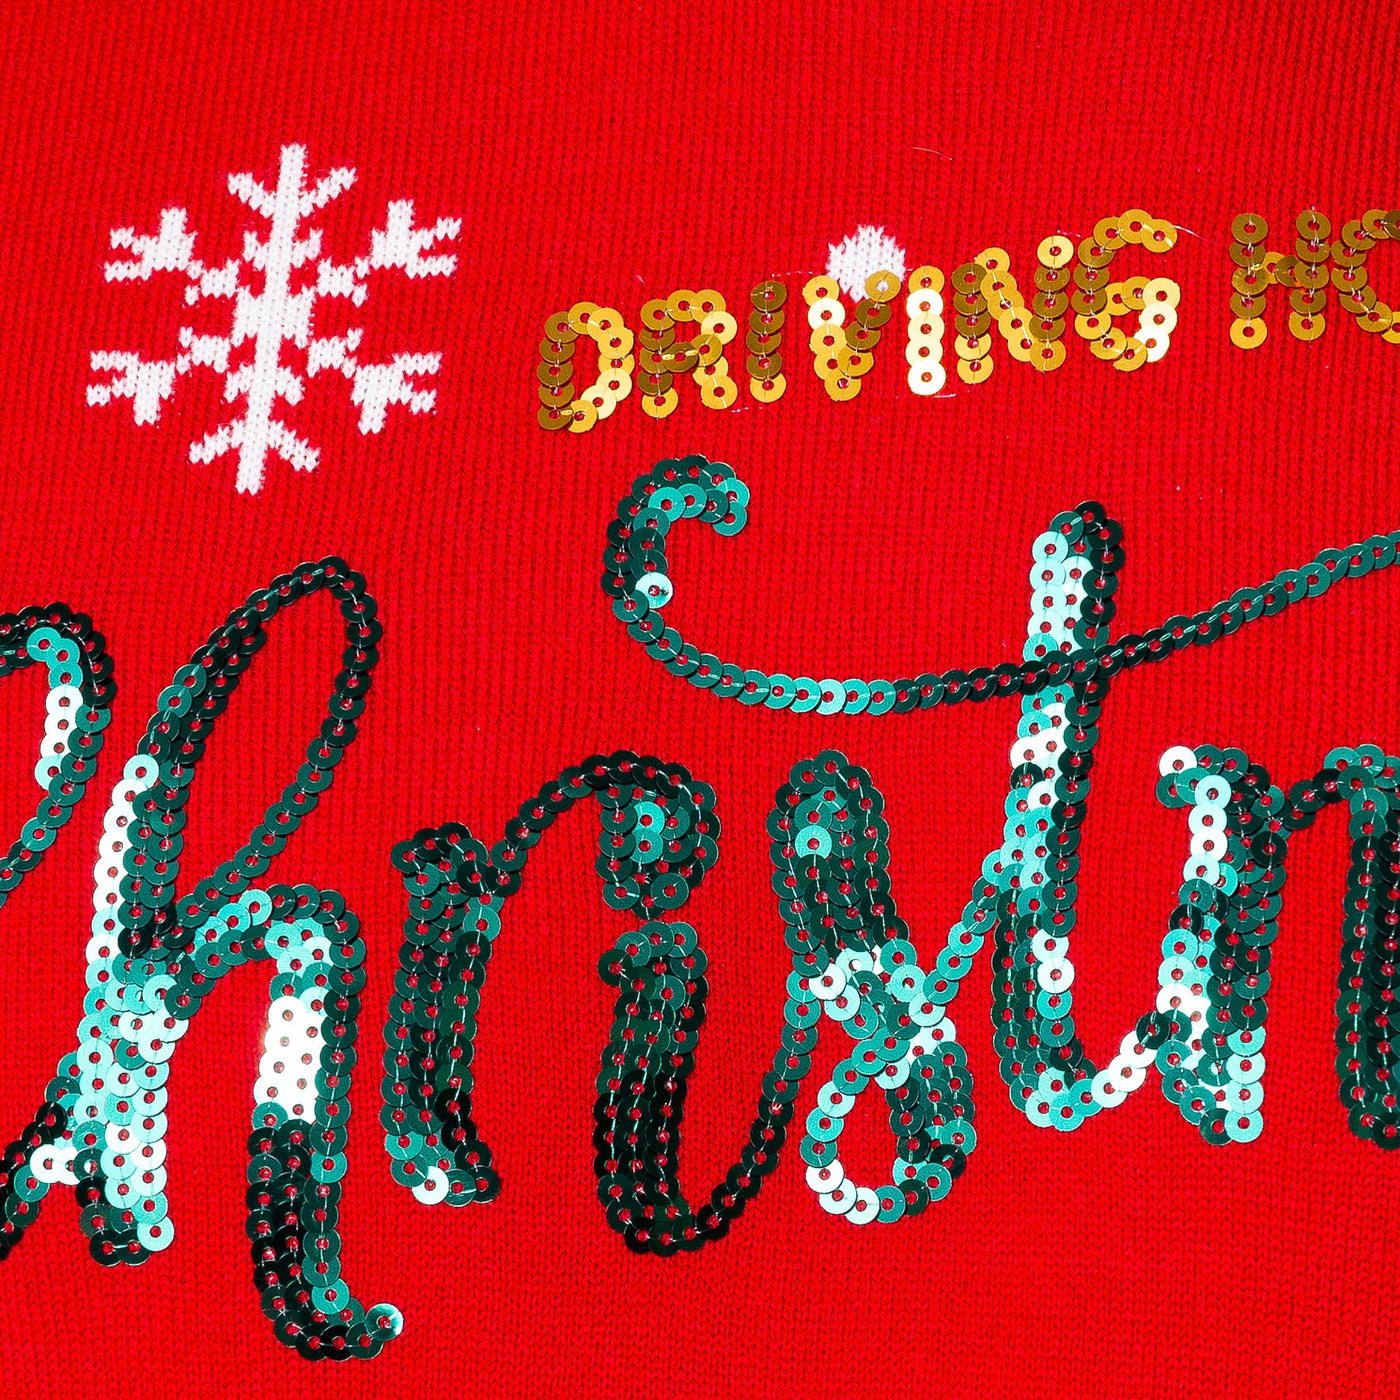 Driving Home For Christmas Julesweater Herre